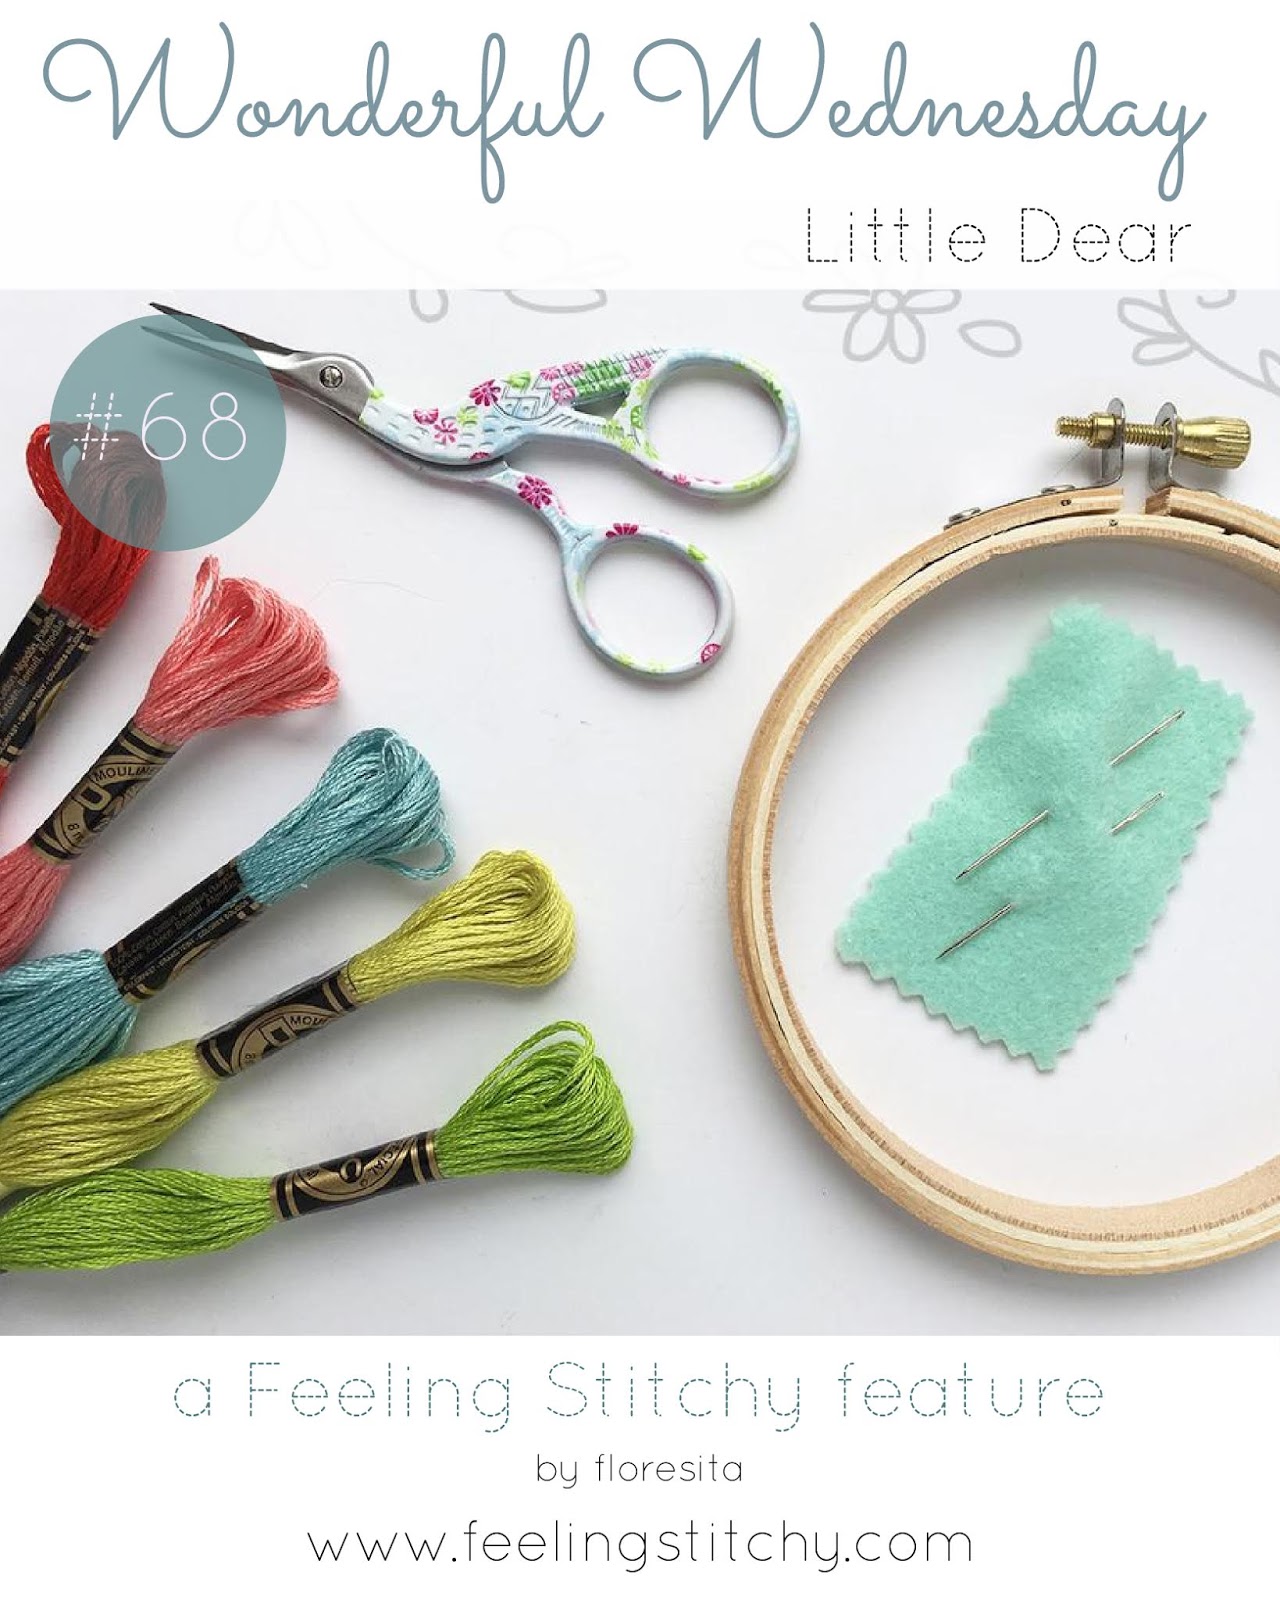 Wonderful Wednesday 68 Little Dear Aimee Ray Sewing Kits as featured by floresita on Feeling Stitchy